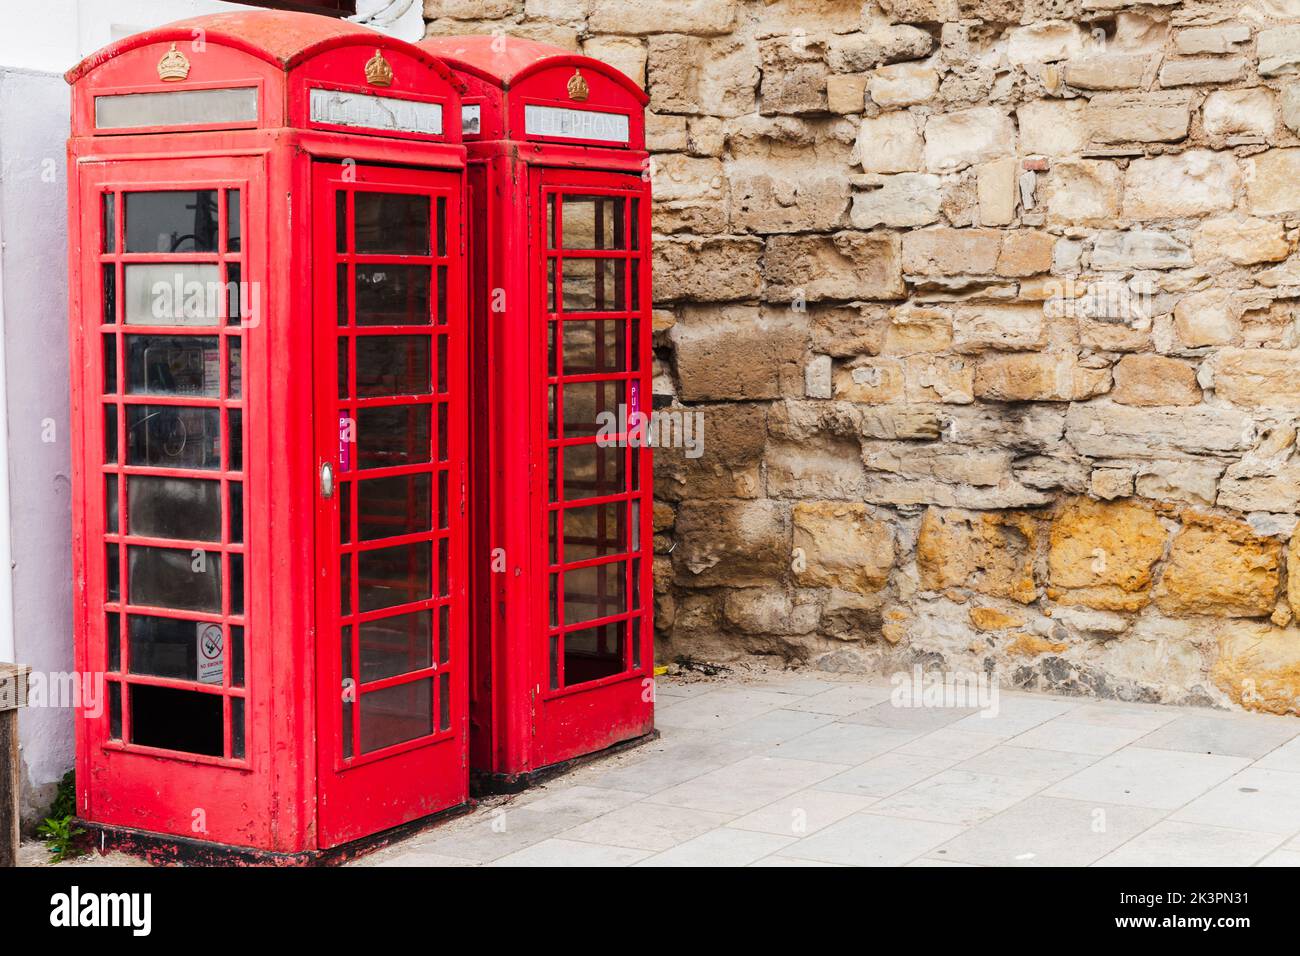 Southampton, United Kingdom - April 23, 2019: Two K6 telephone boxes stand on the street Stock Photo